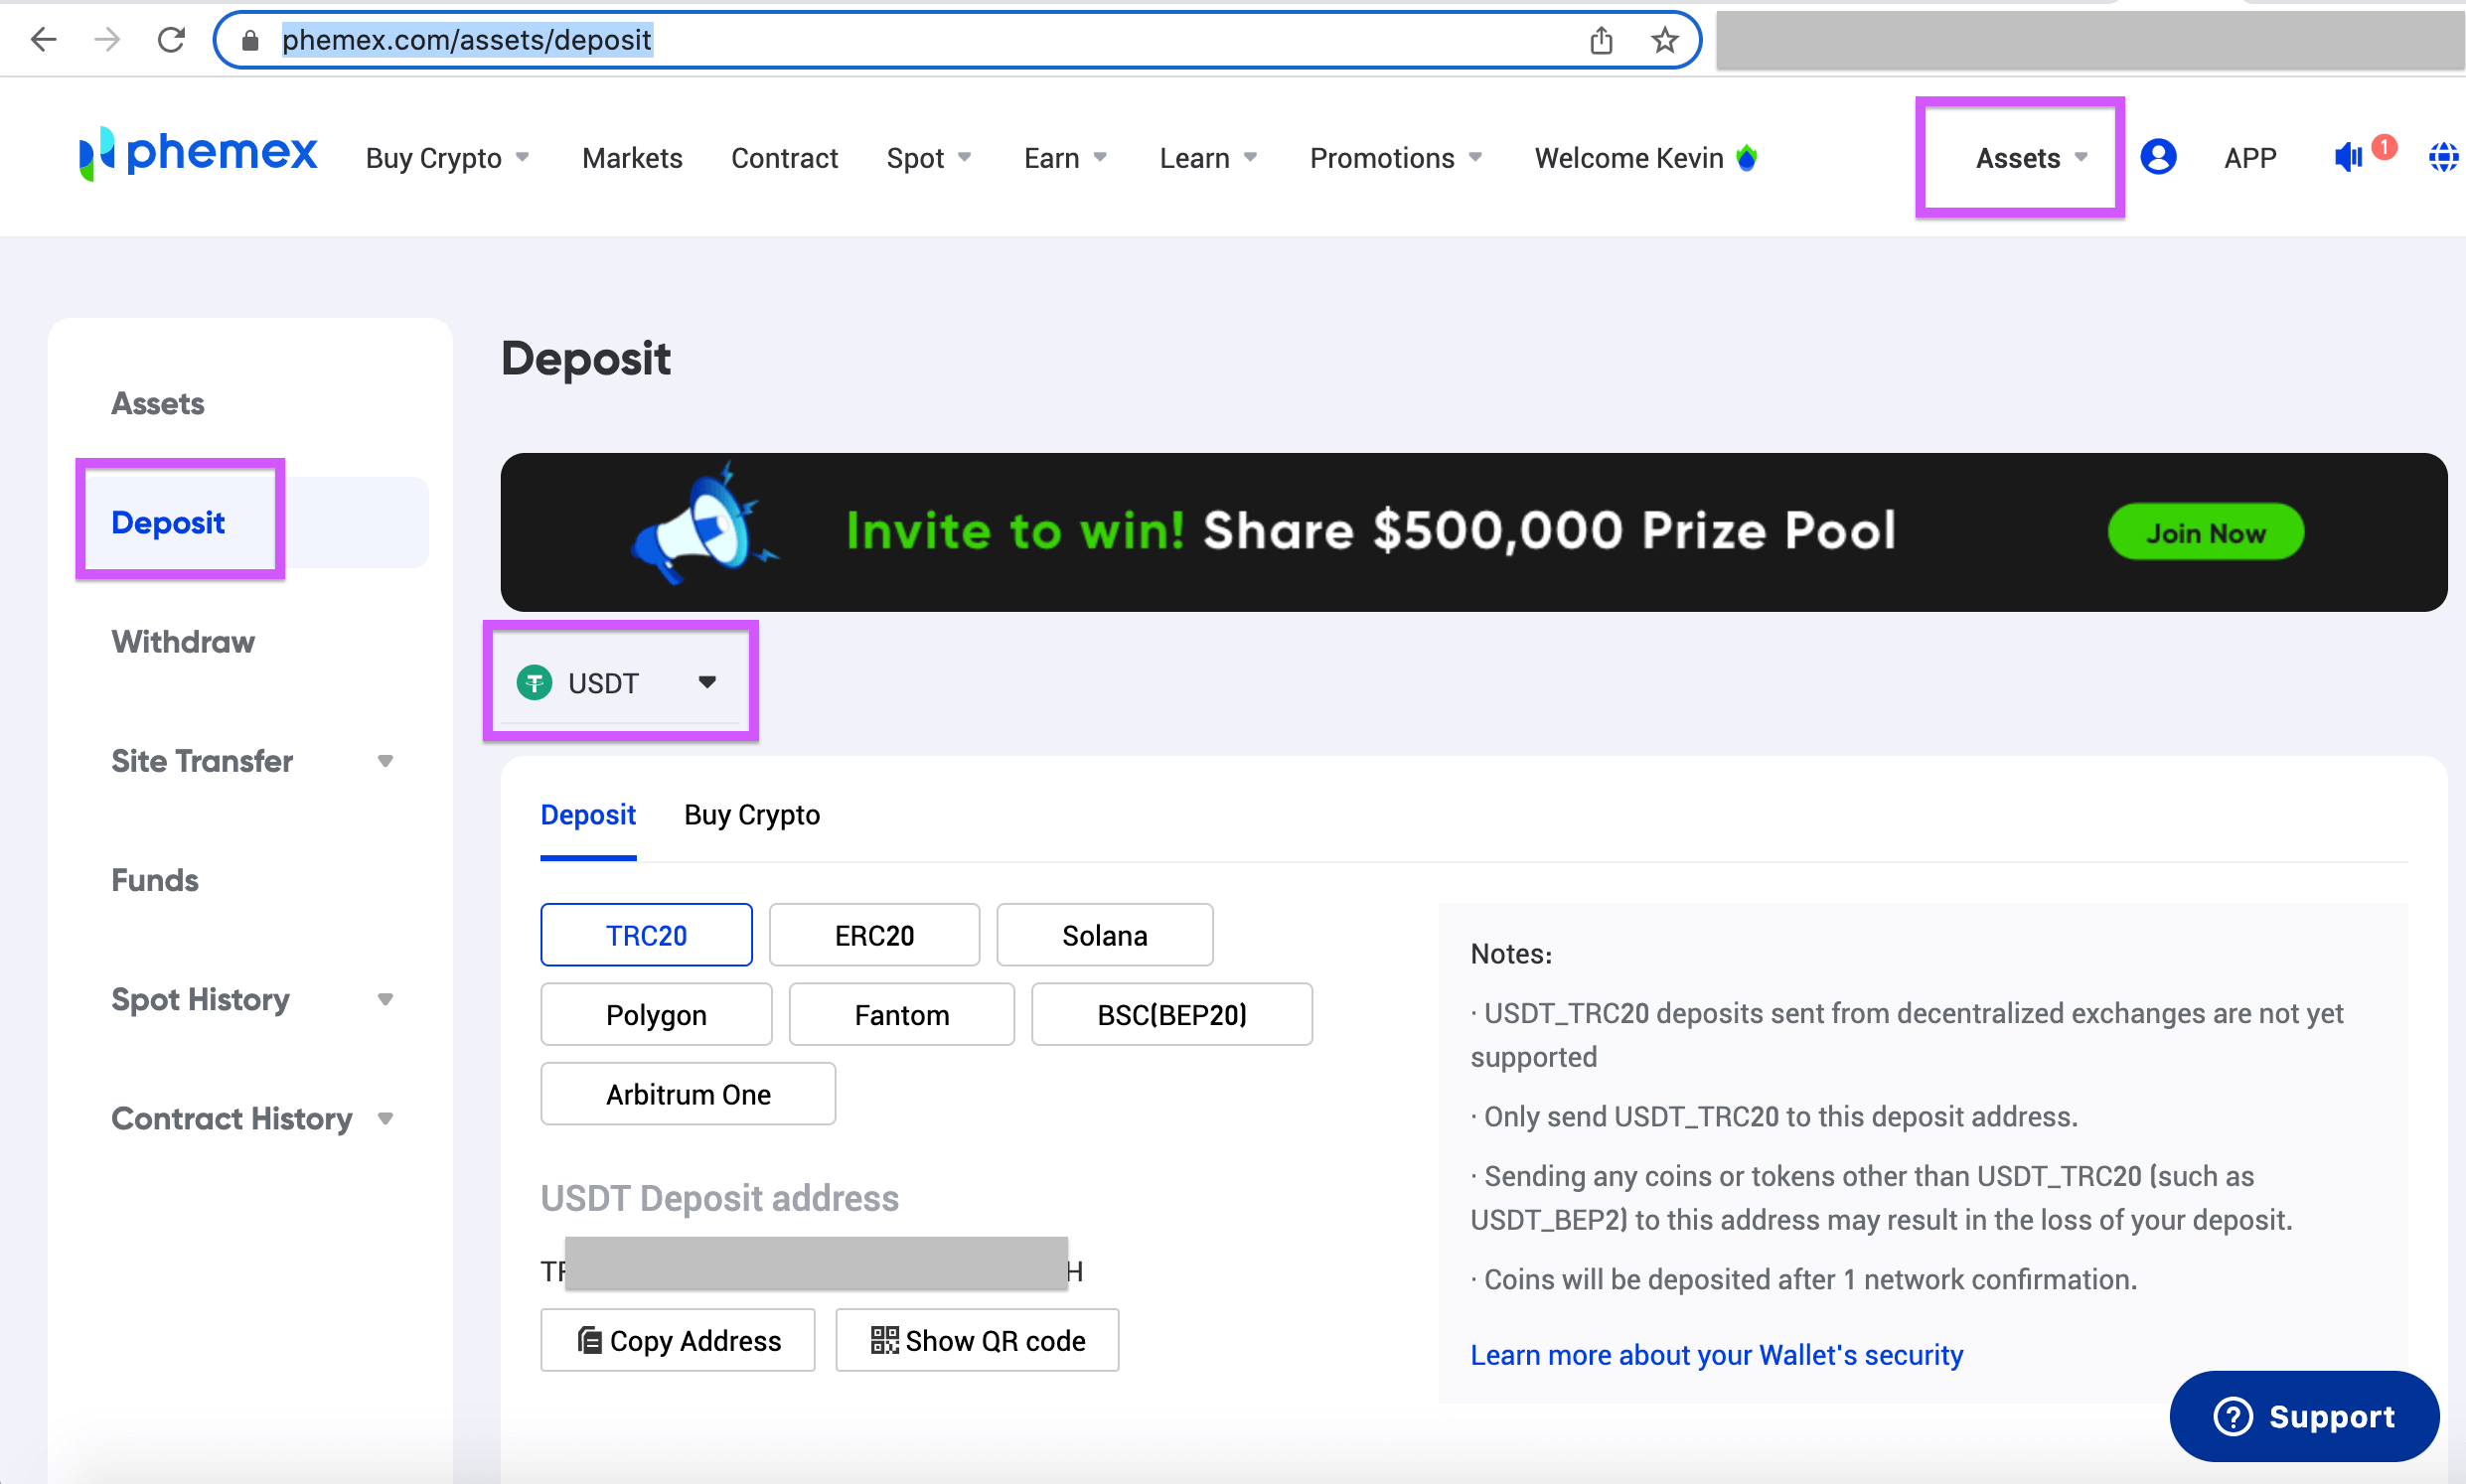 Generate a deposit address for the blockchain on which your Tether lives.